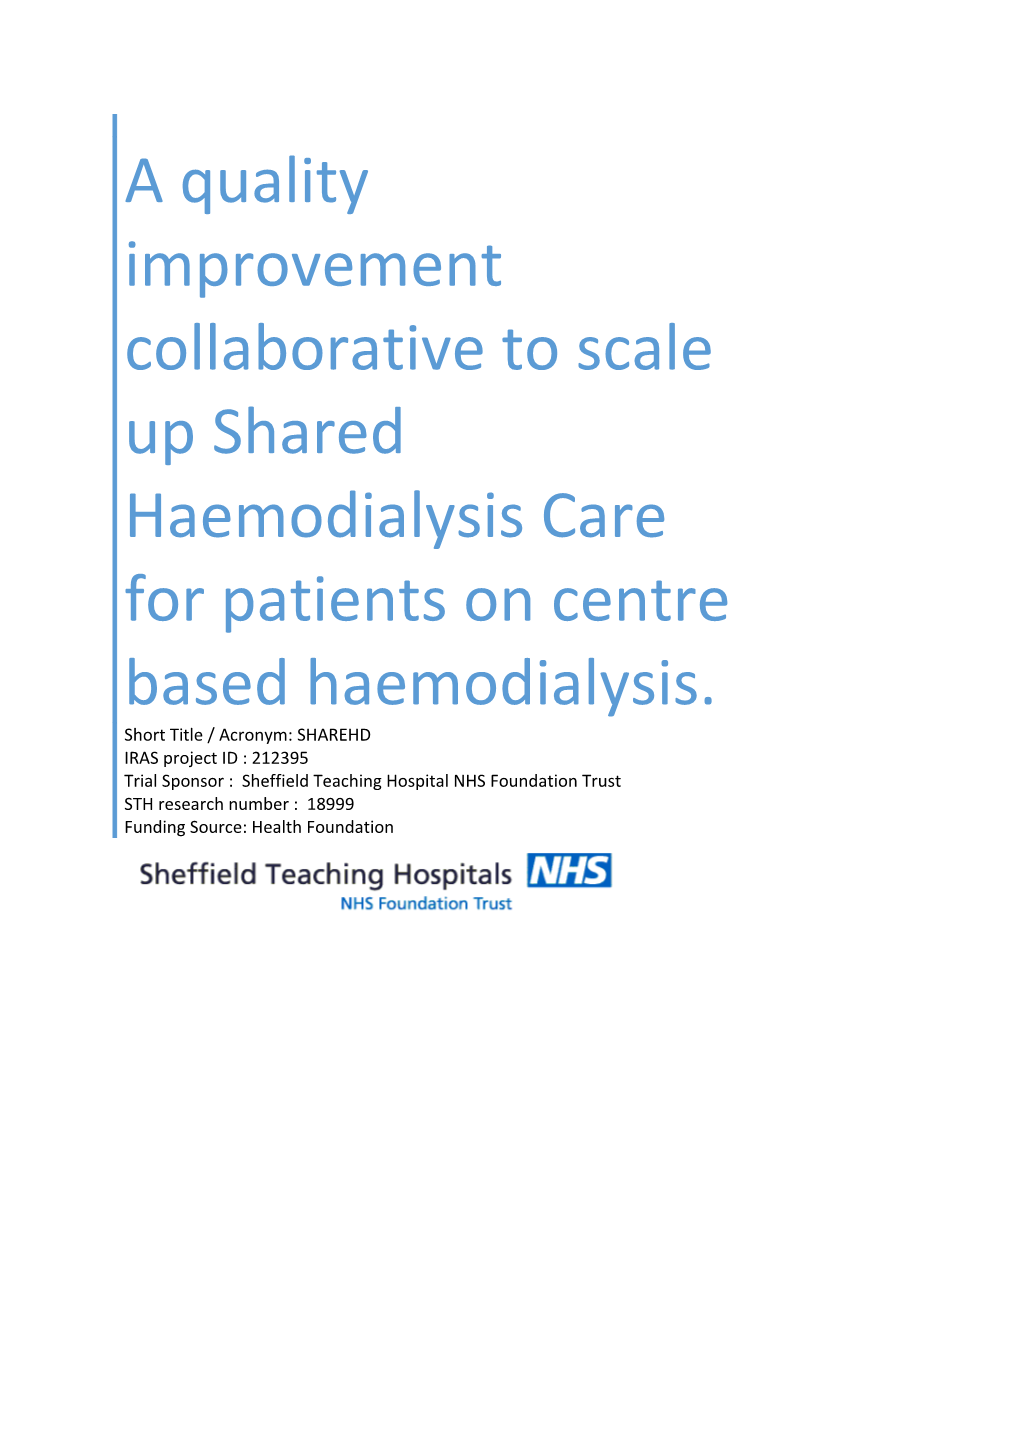 A Quality Improvement Collaborative to Scale up Shared Haemodialysis Care for Patients